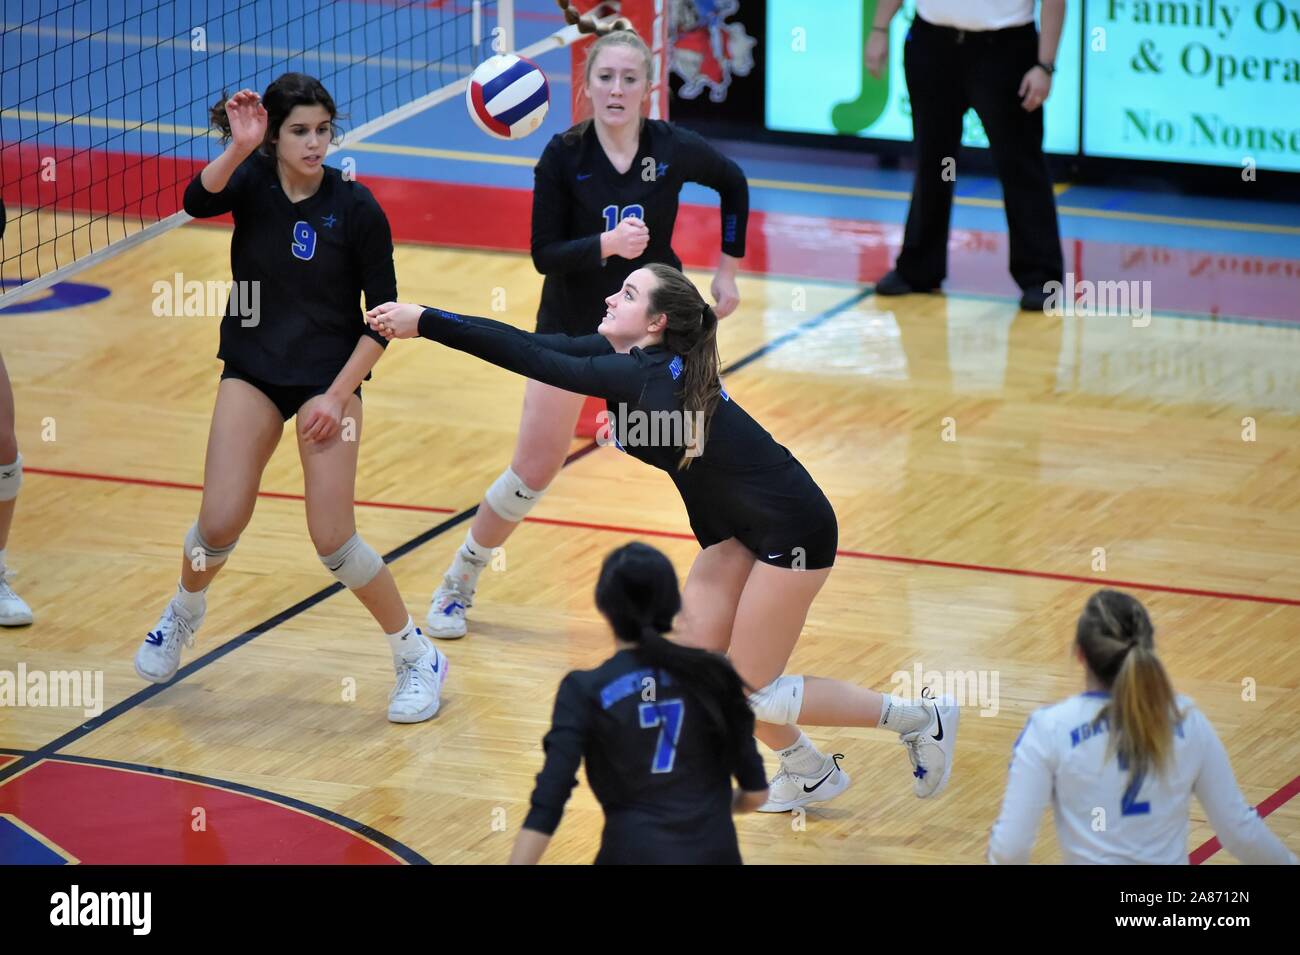 Player straining to keep a volley alive during a prolonged volley. USA. Stock Photo